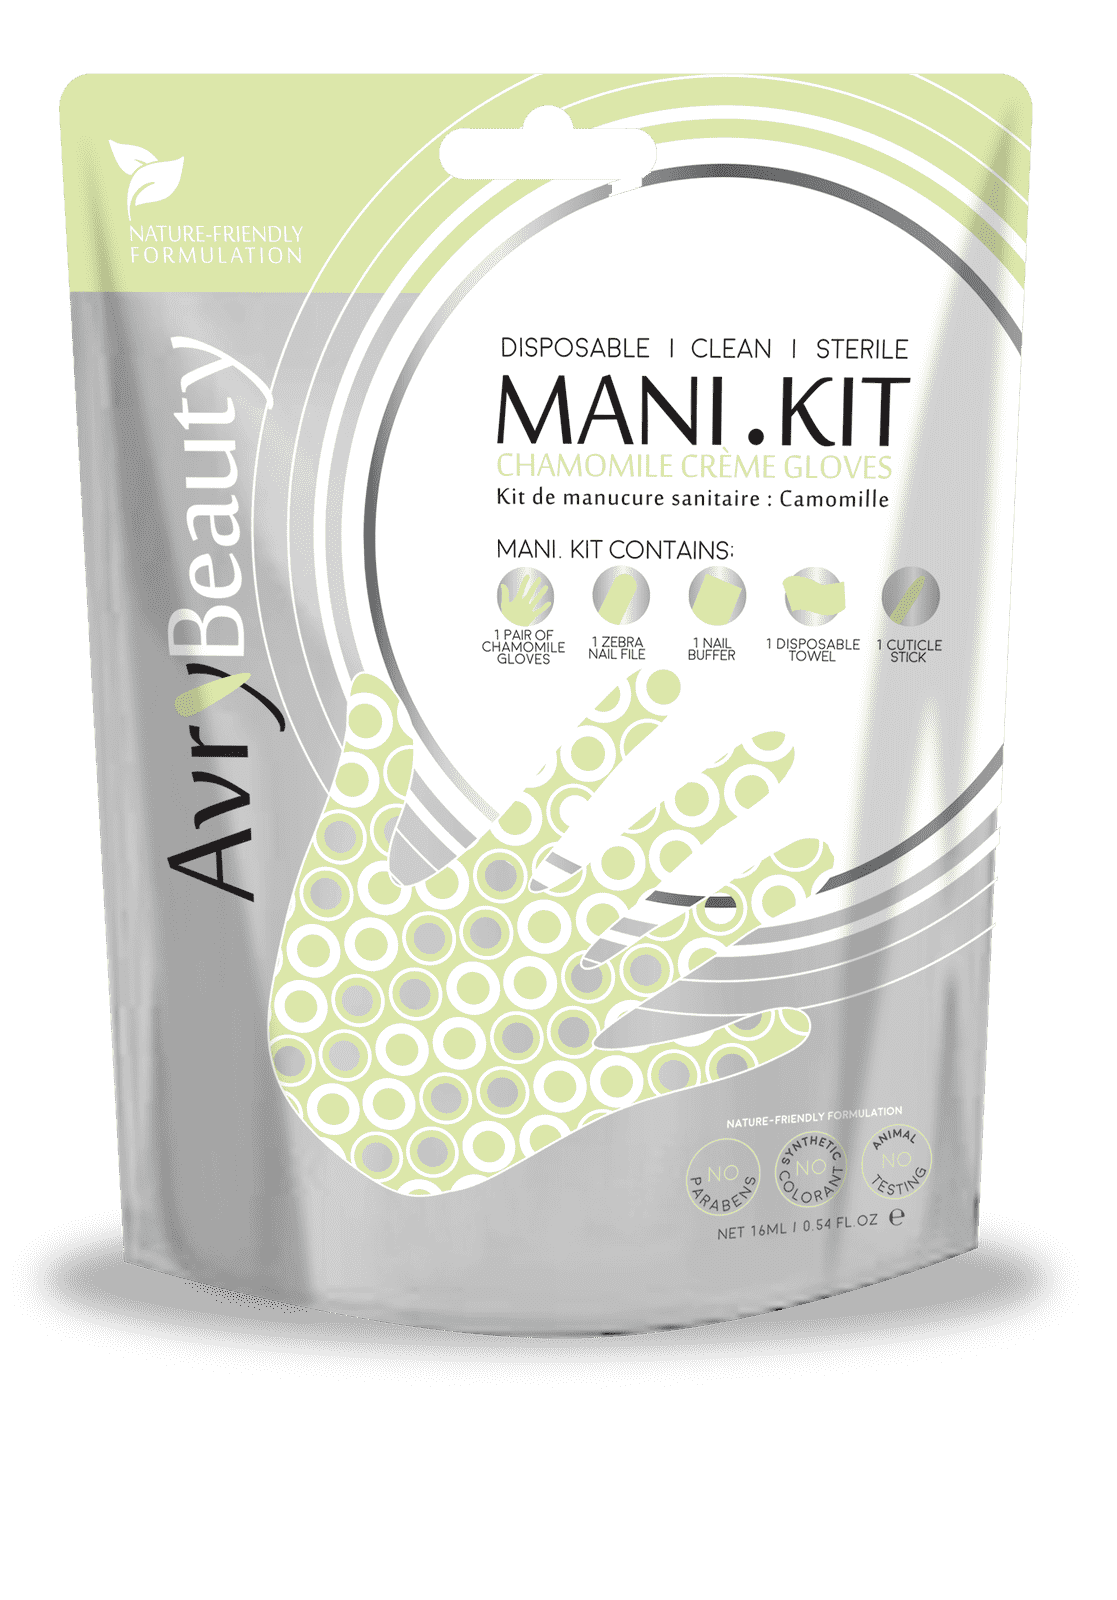 All-In-One Disposable MANI Kit with Chamomile Gloves - Maskscara